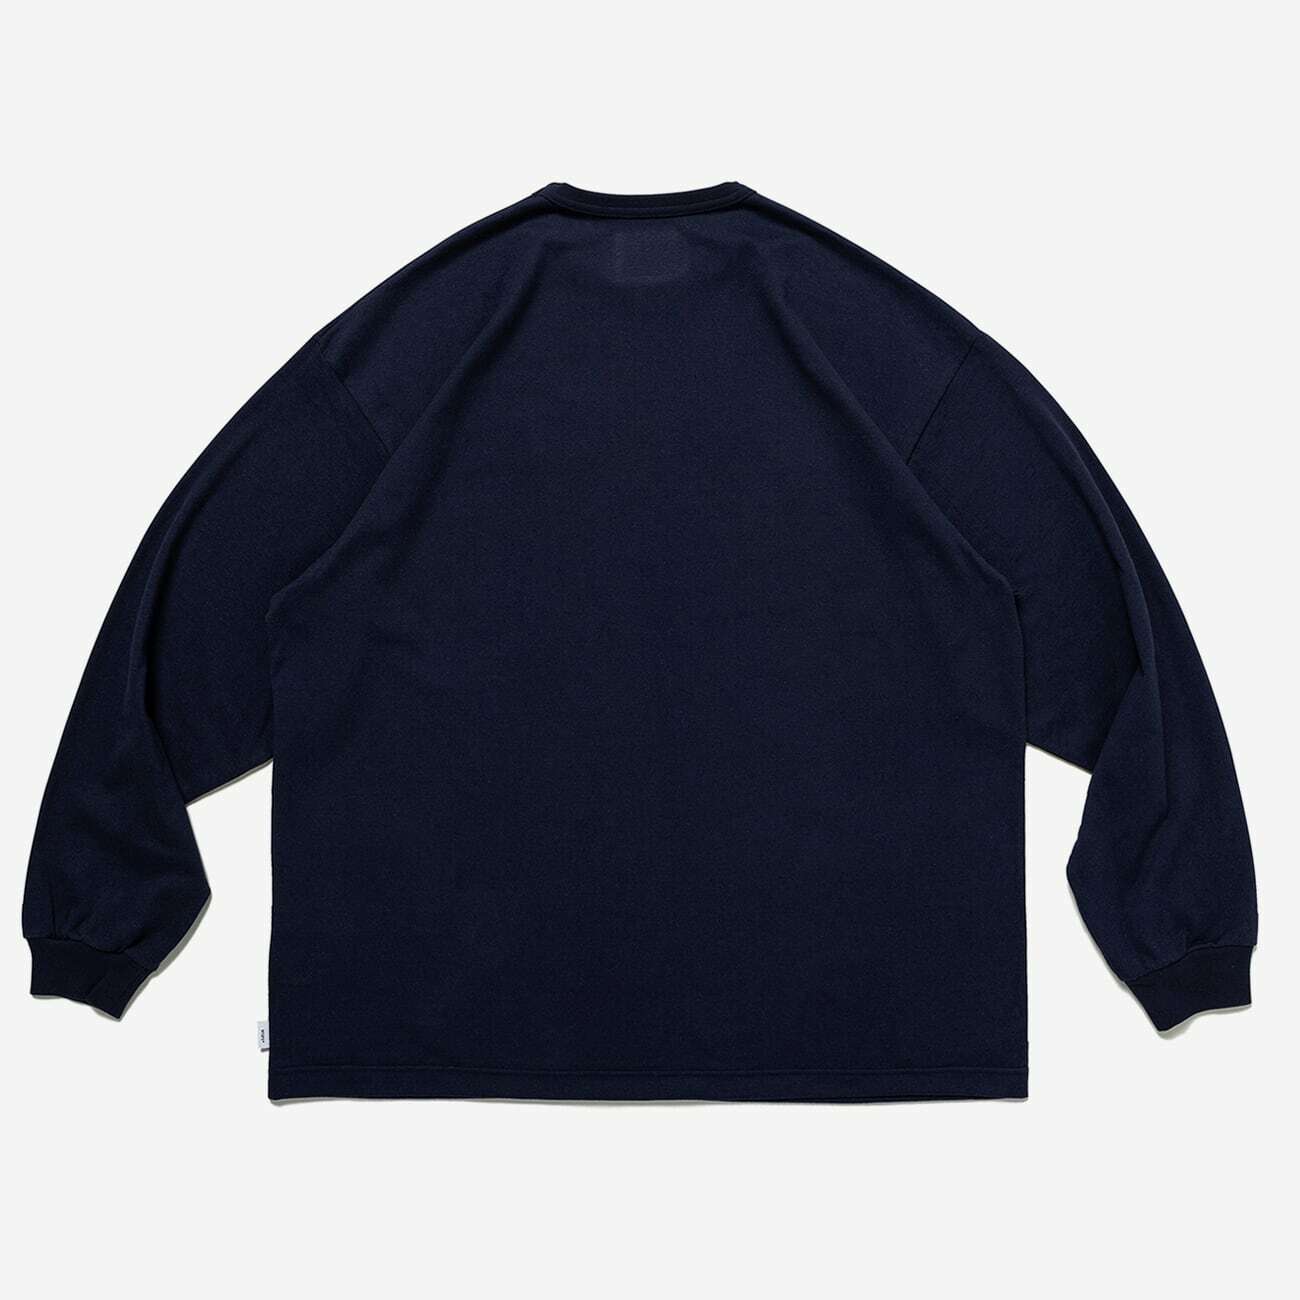 2023 2nd wtaps スポットCOLLEGE / LS / COTTON | www.hurdl.org